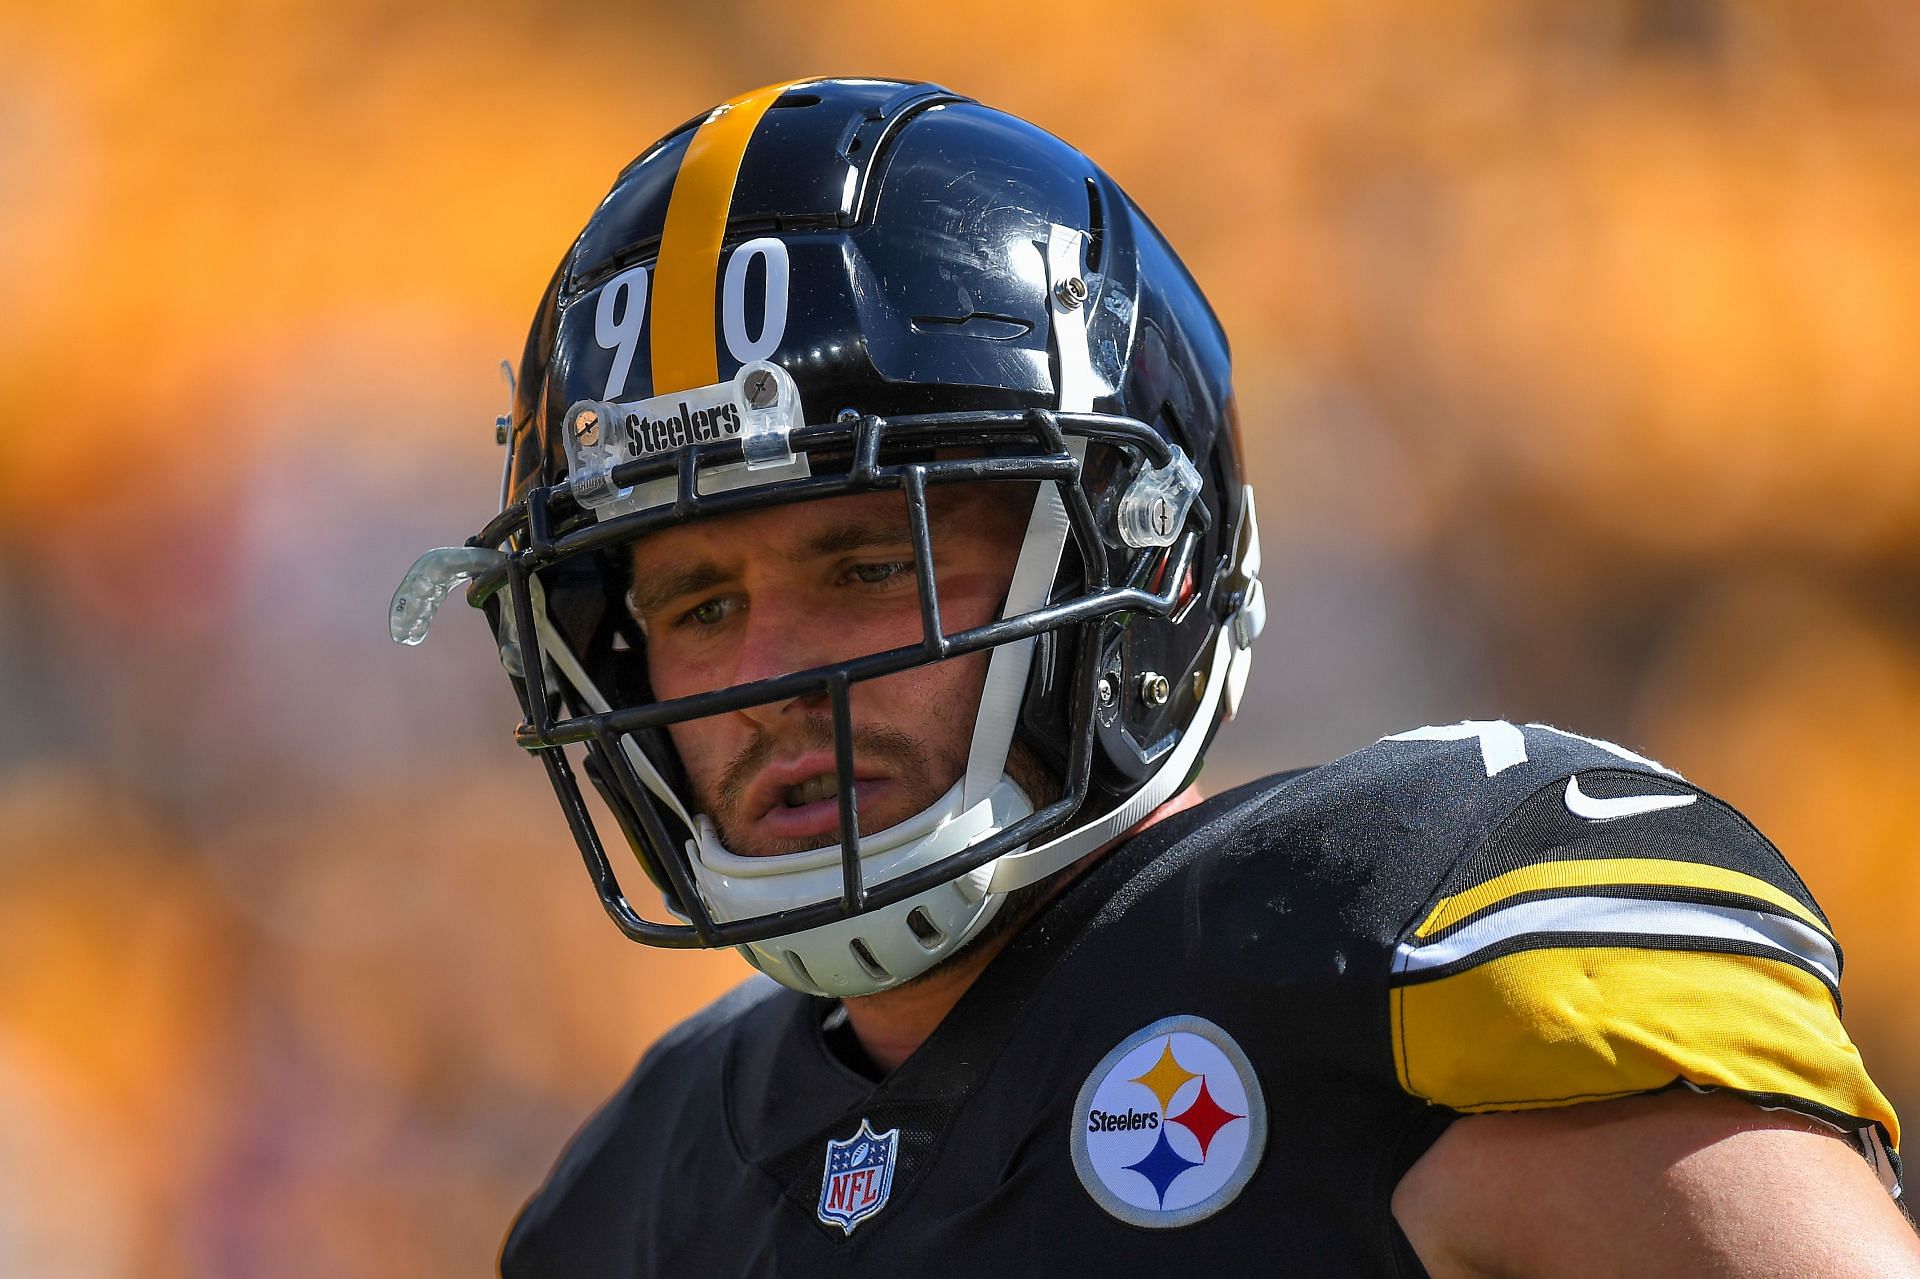 Steelers' appeal to give T.J. Watt sacking record falls short